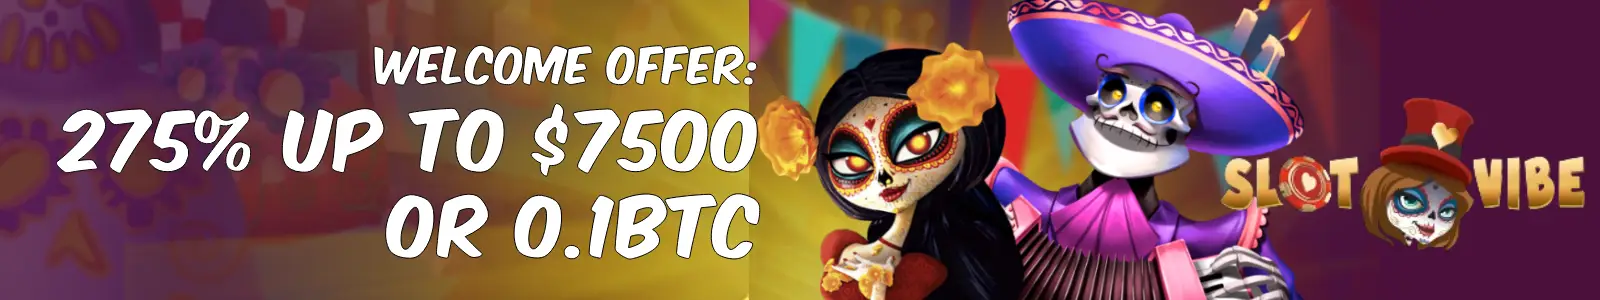 Slotvibe Casino Welcome Offer